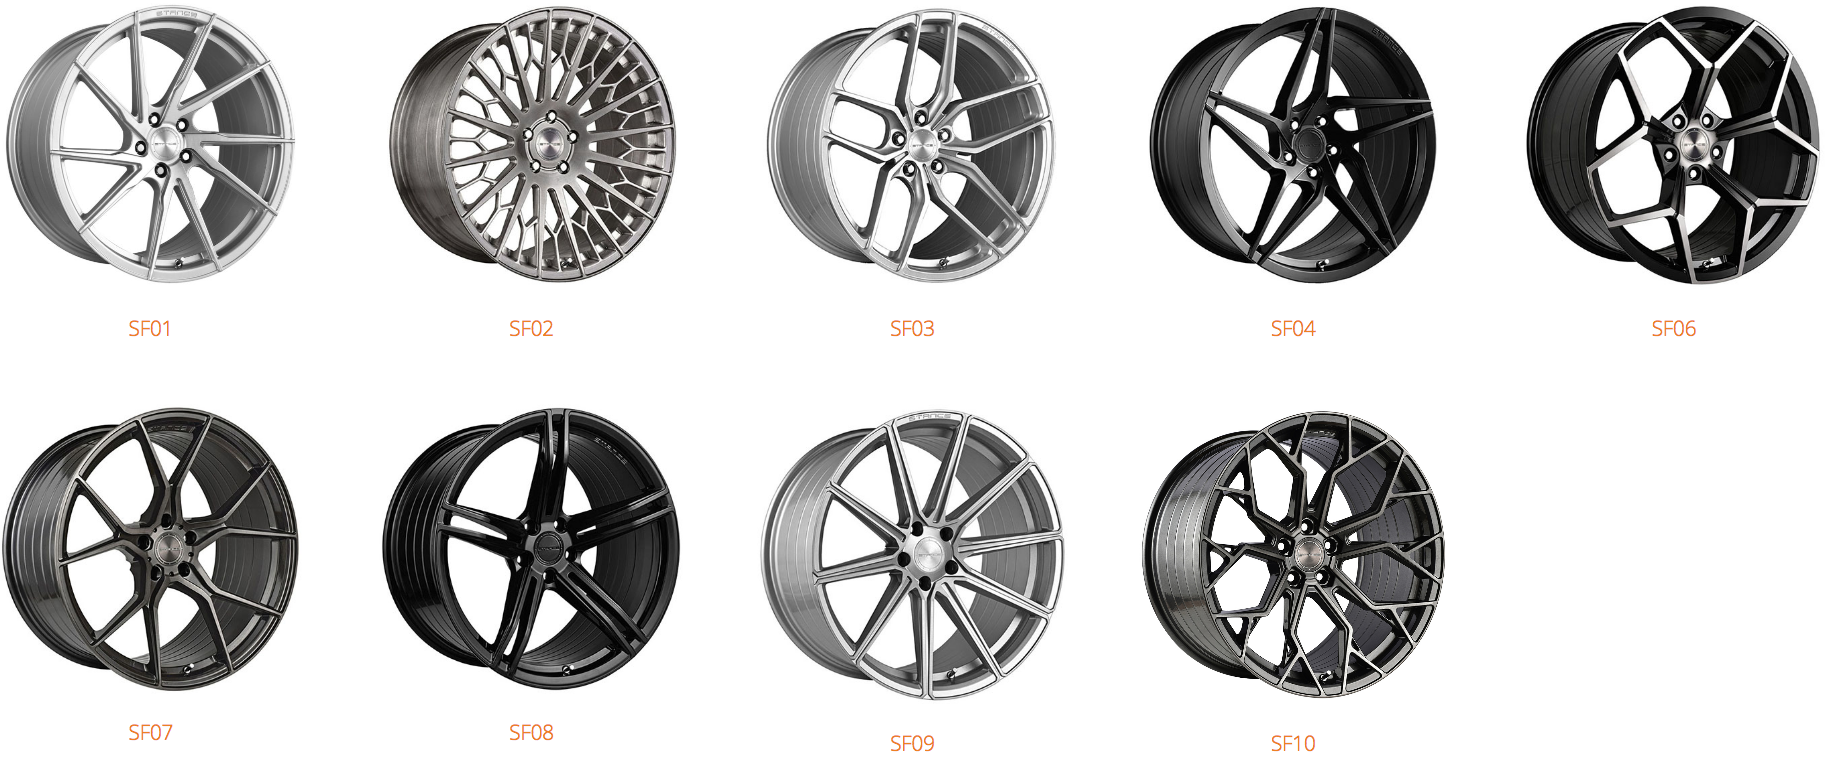 t_2020-11-11-sf-series-%E2%80%93-stance-wheels-png.png